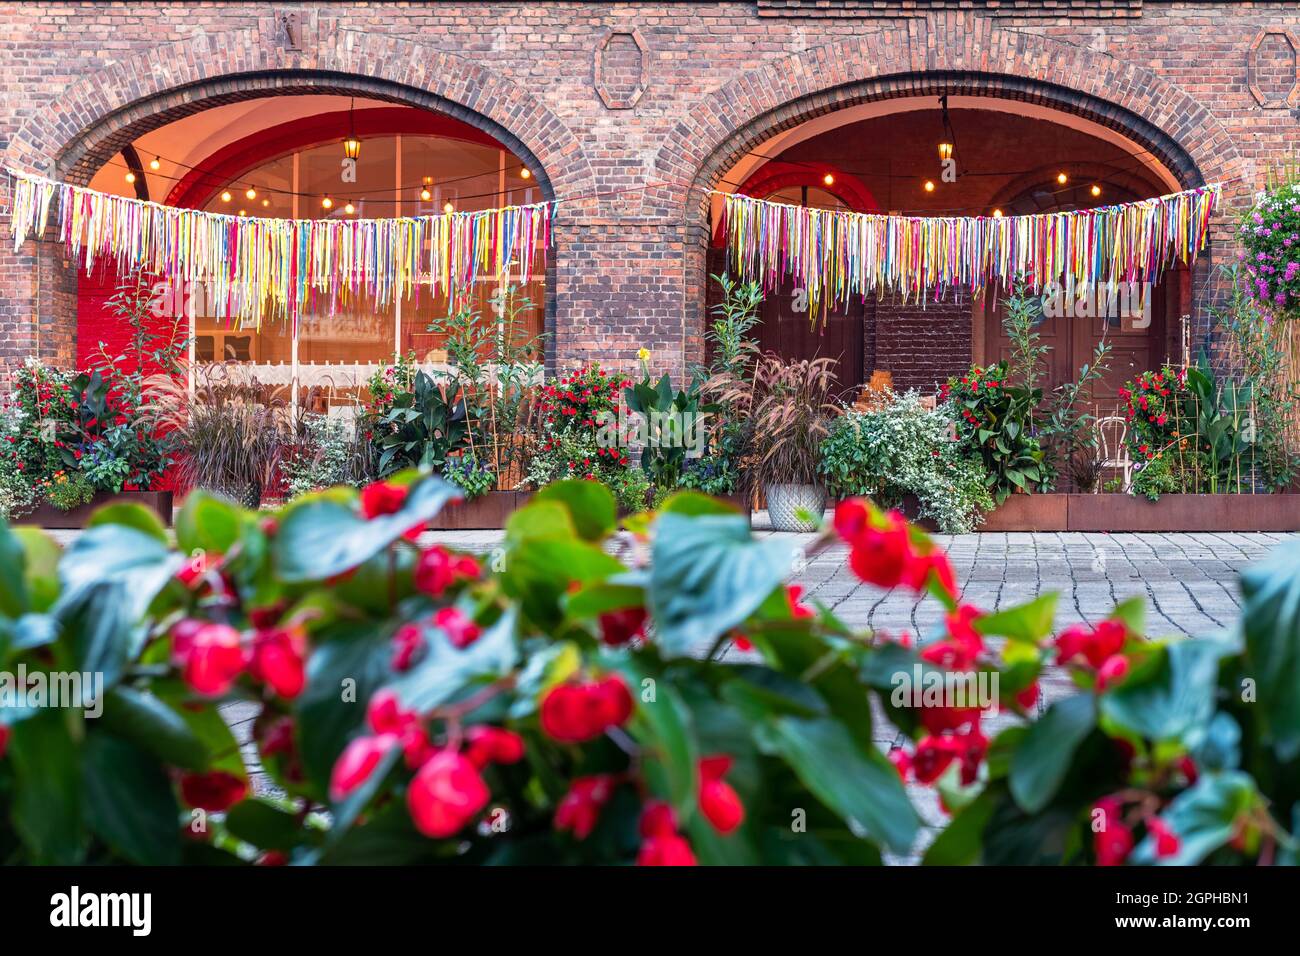 Detail of the arcade in an old, traditional, silesian brick block house in Nikiszowiec, Katowice, Poland. Colorful ribbons hanging as a decoration in Stock Photo